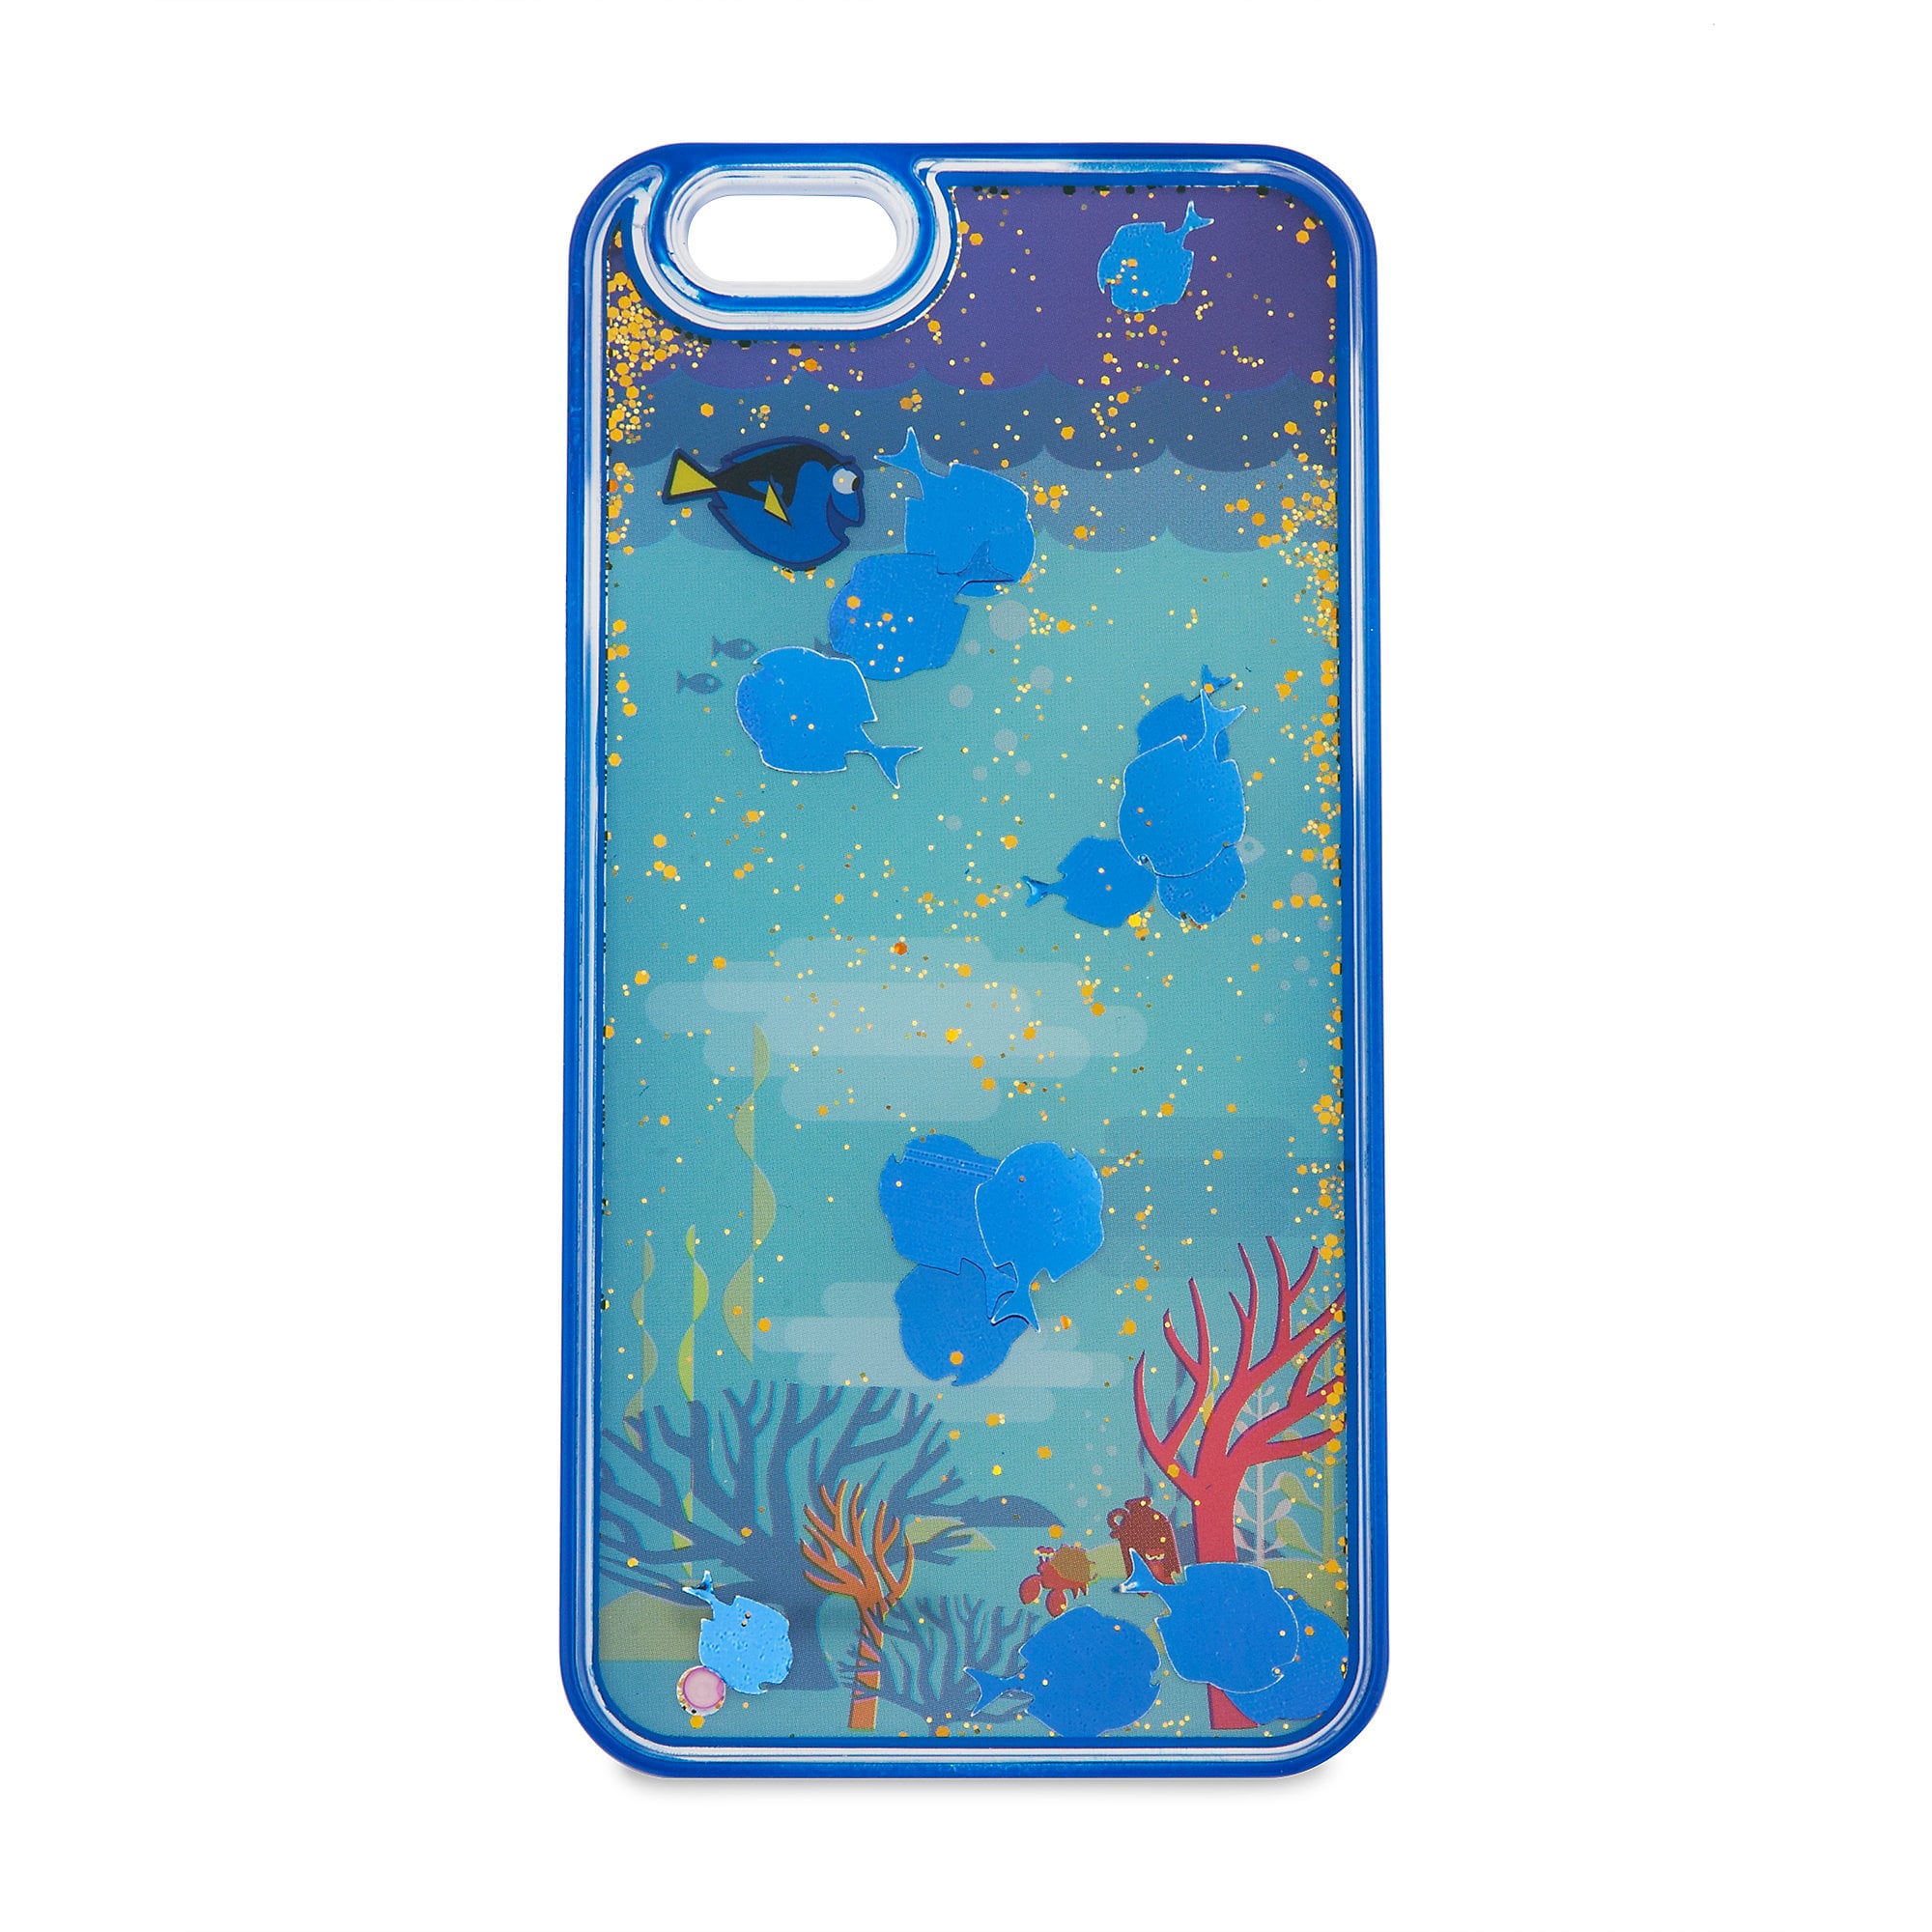 Disney Store Exclusive Finding Dory Iphone 6 Case The Newest Finding Dory Products Are About To Make A Major Splash Popsugar Family Photo 9